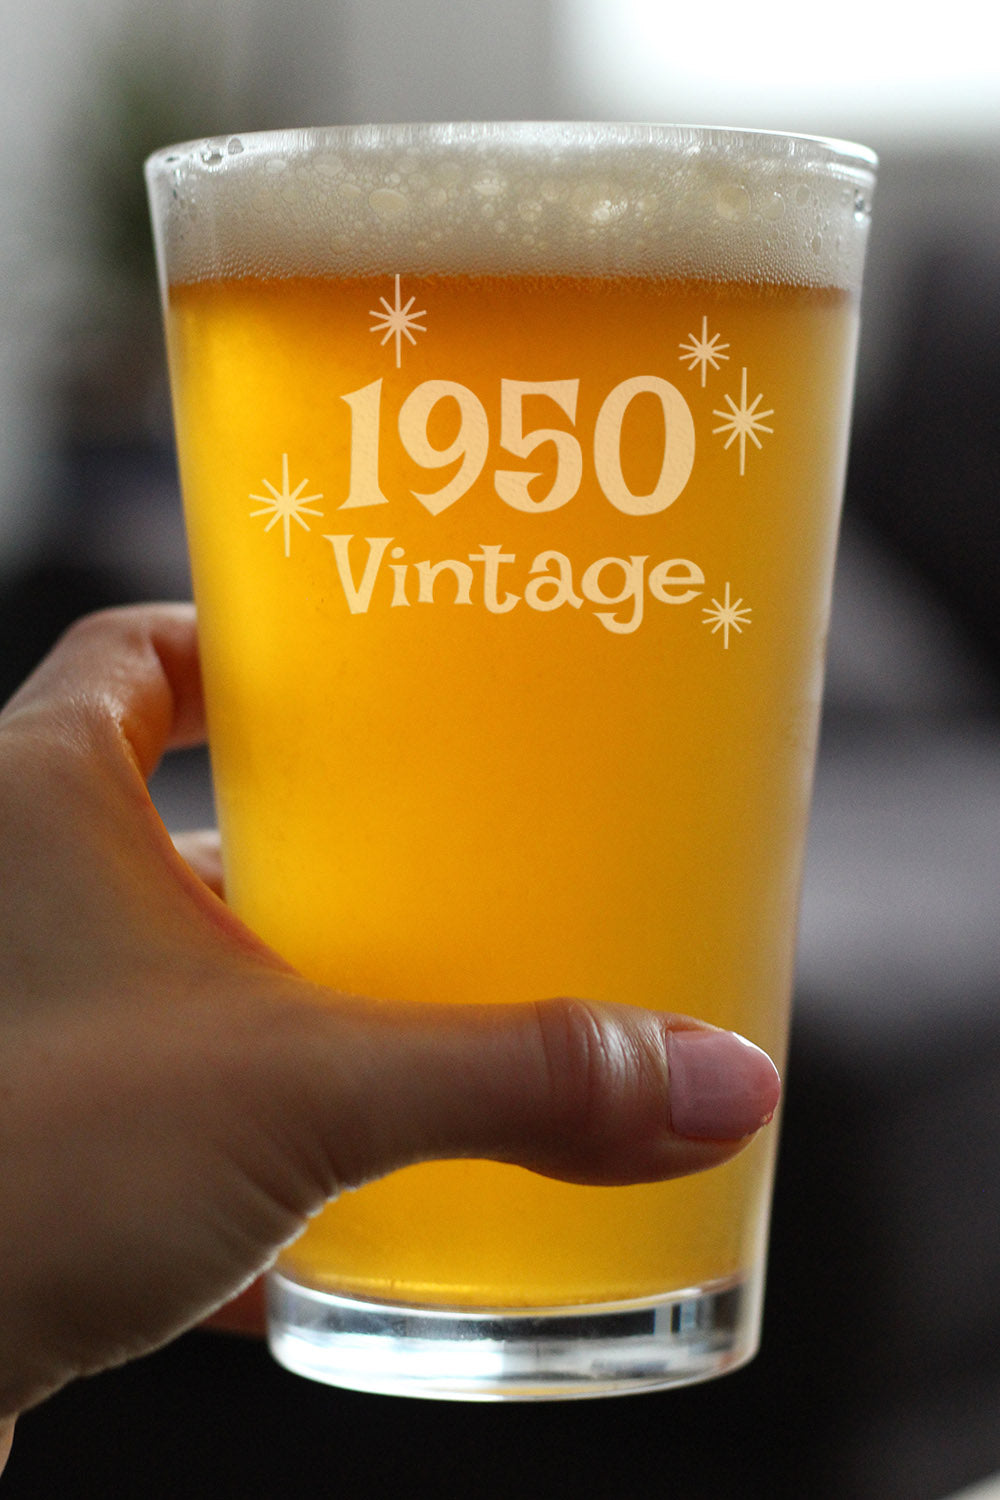 Vintage 1950 - Pint Glass for Beer - 74th Birthday Gifts for Men or Women Turning 74 - Fun Bday Party Decor - 16 oz